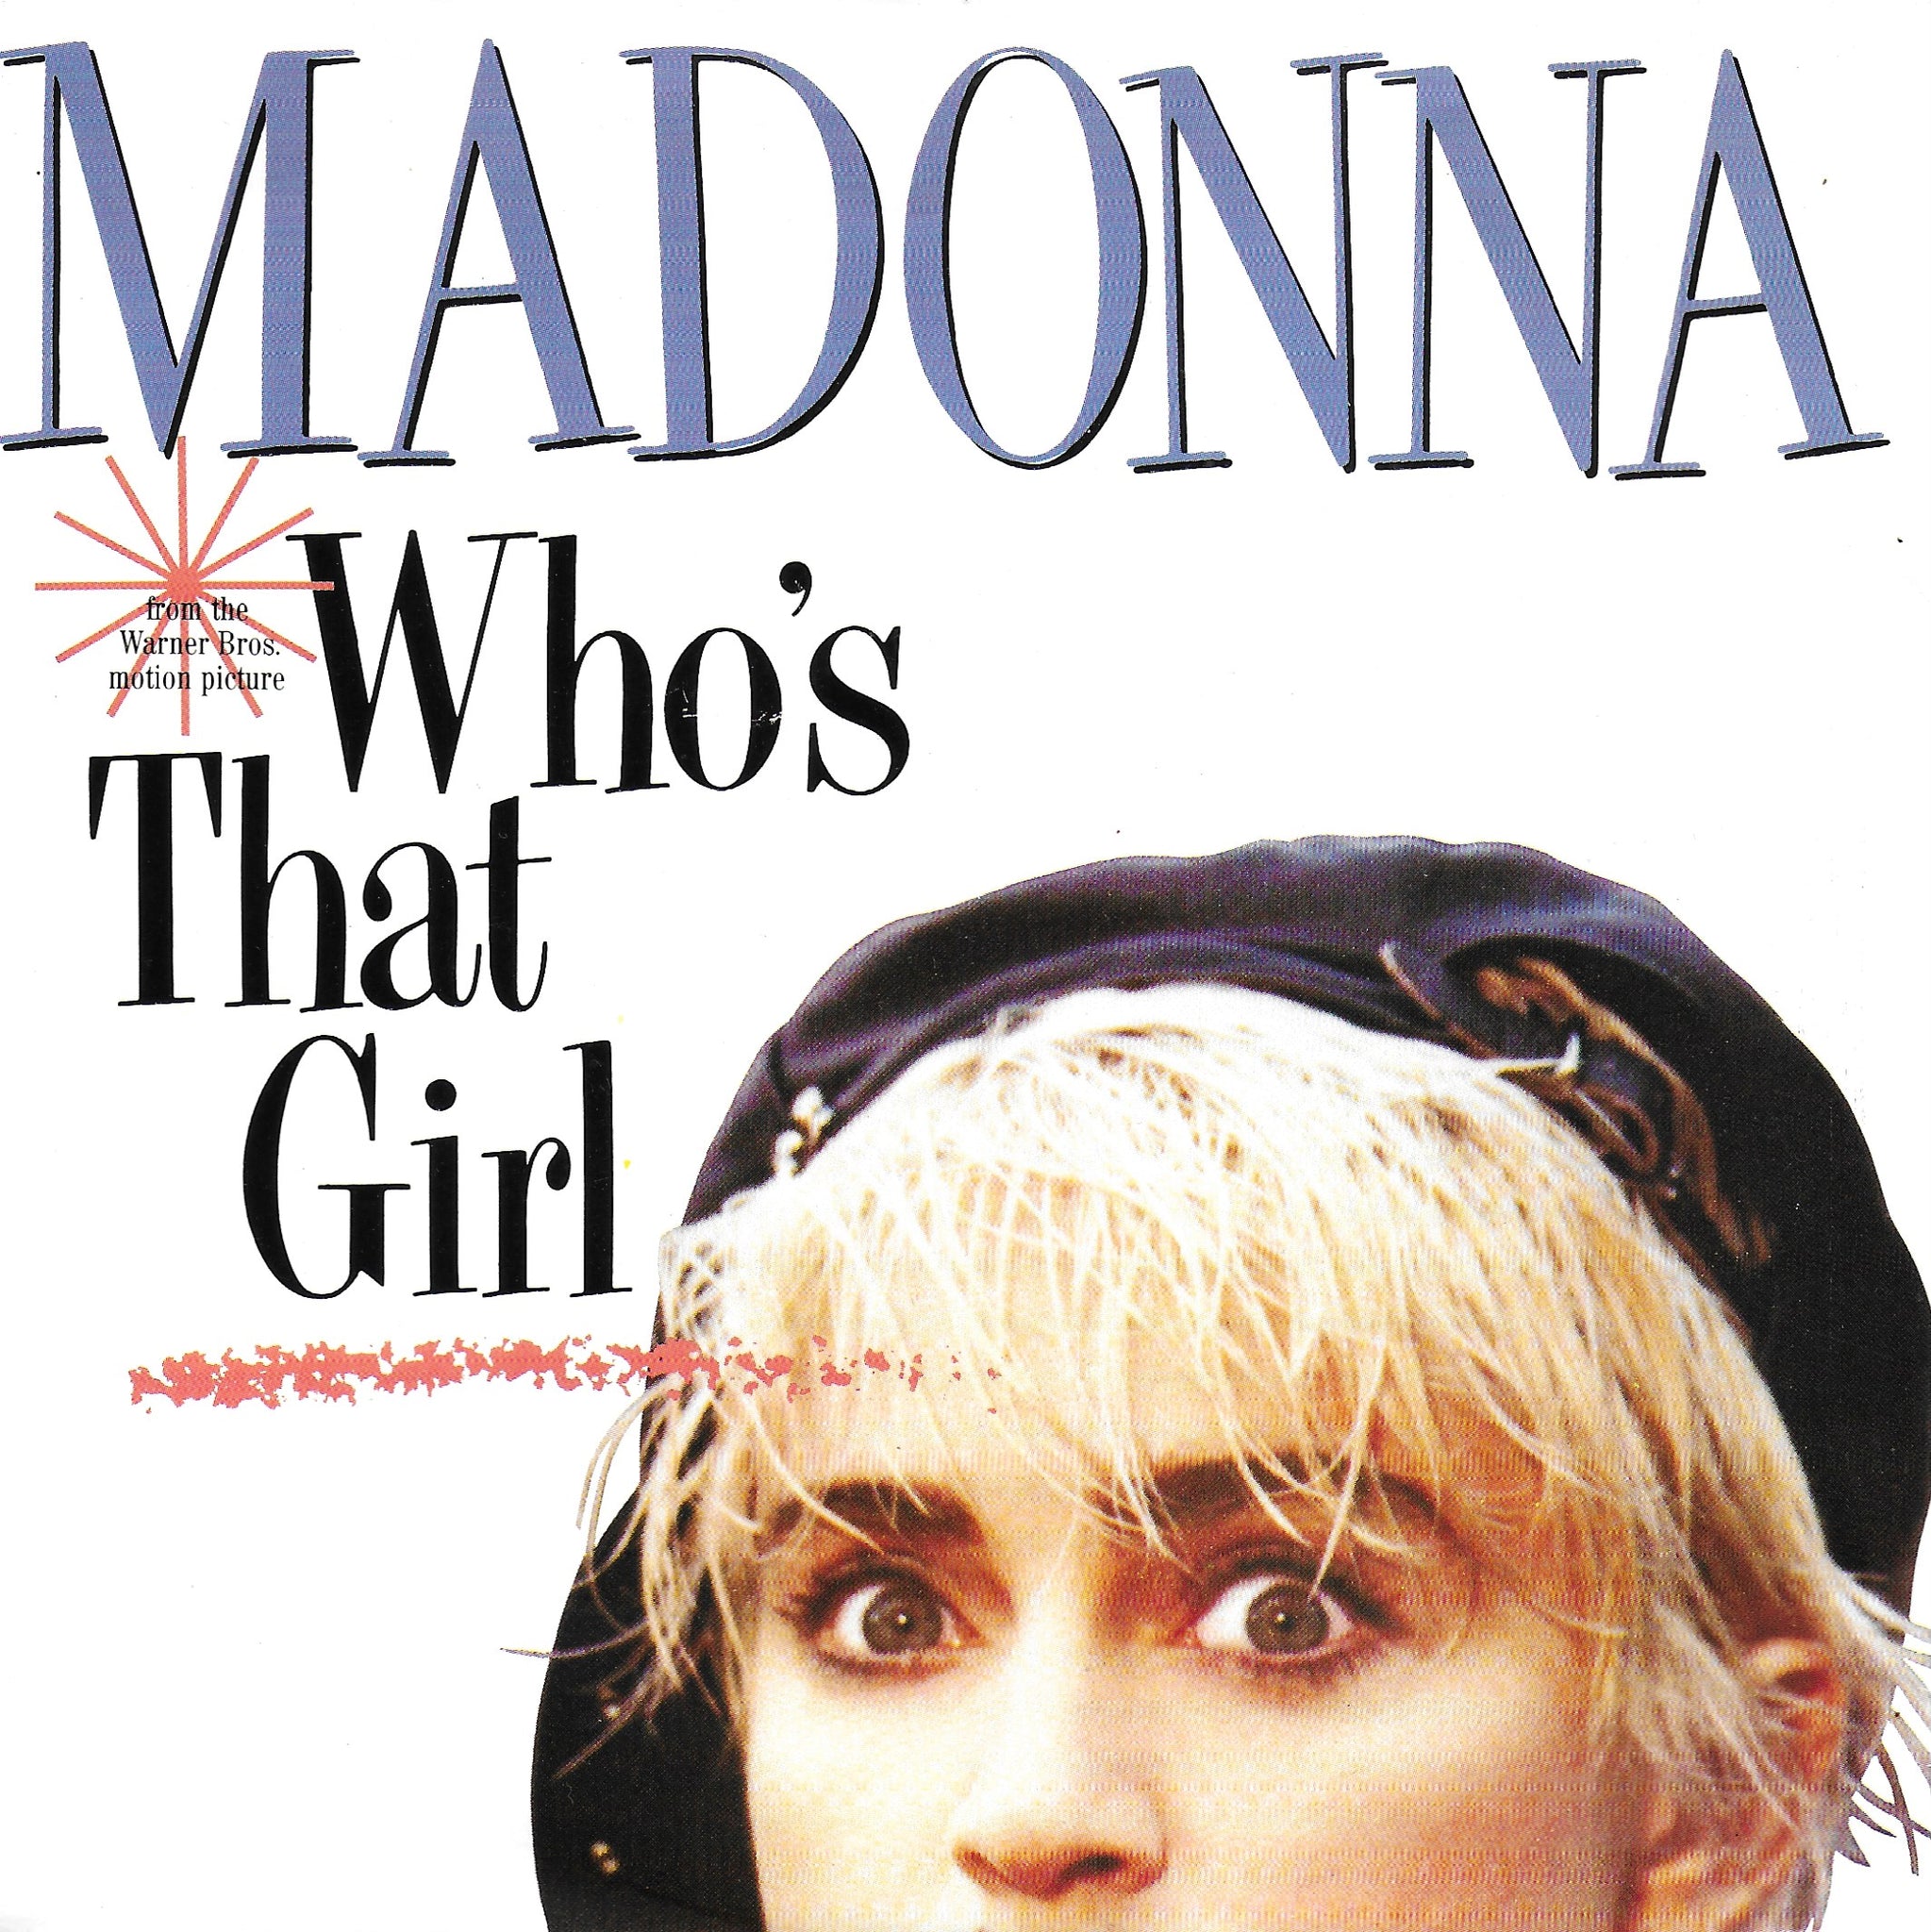 Madonna - Who's that girl (Spaanse uitgave)